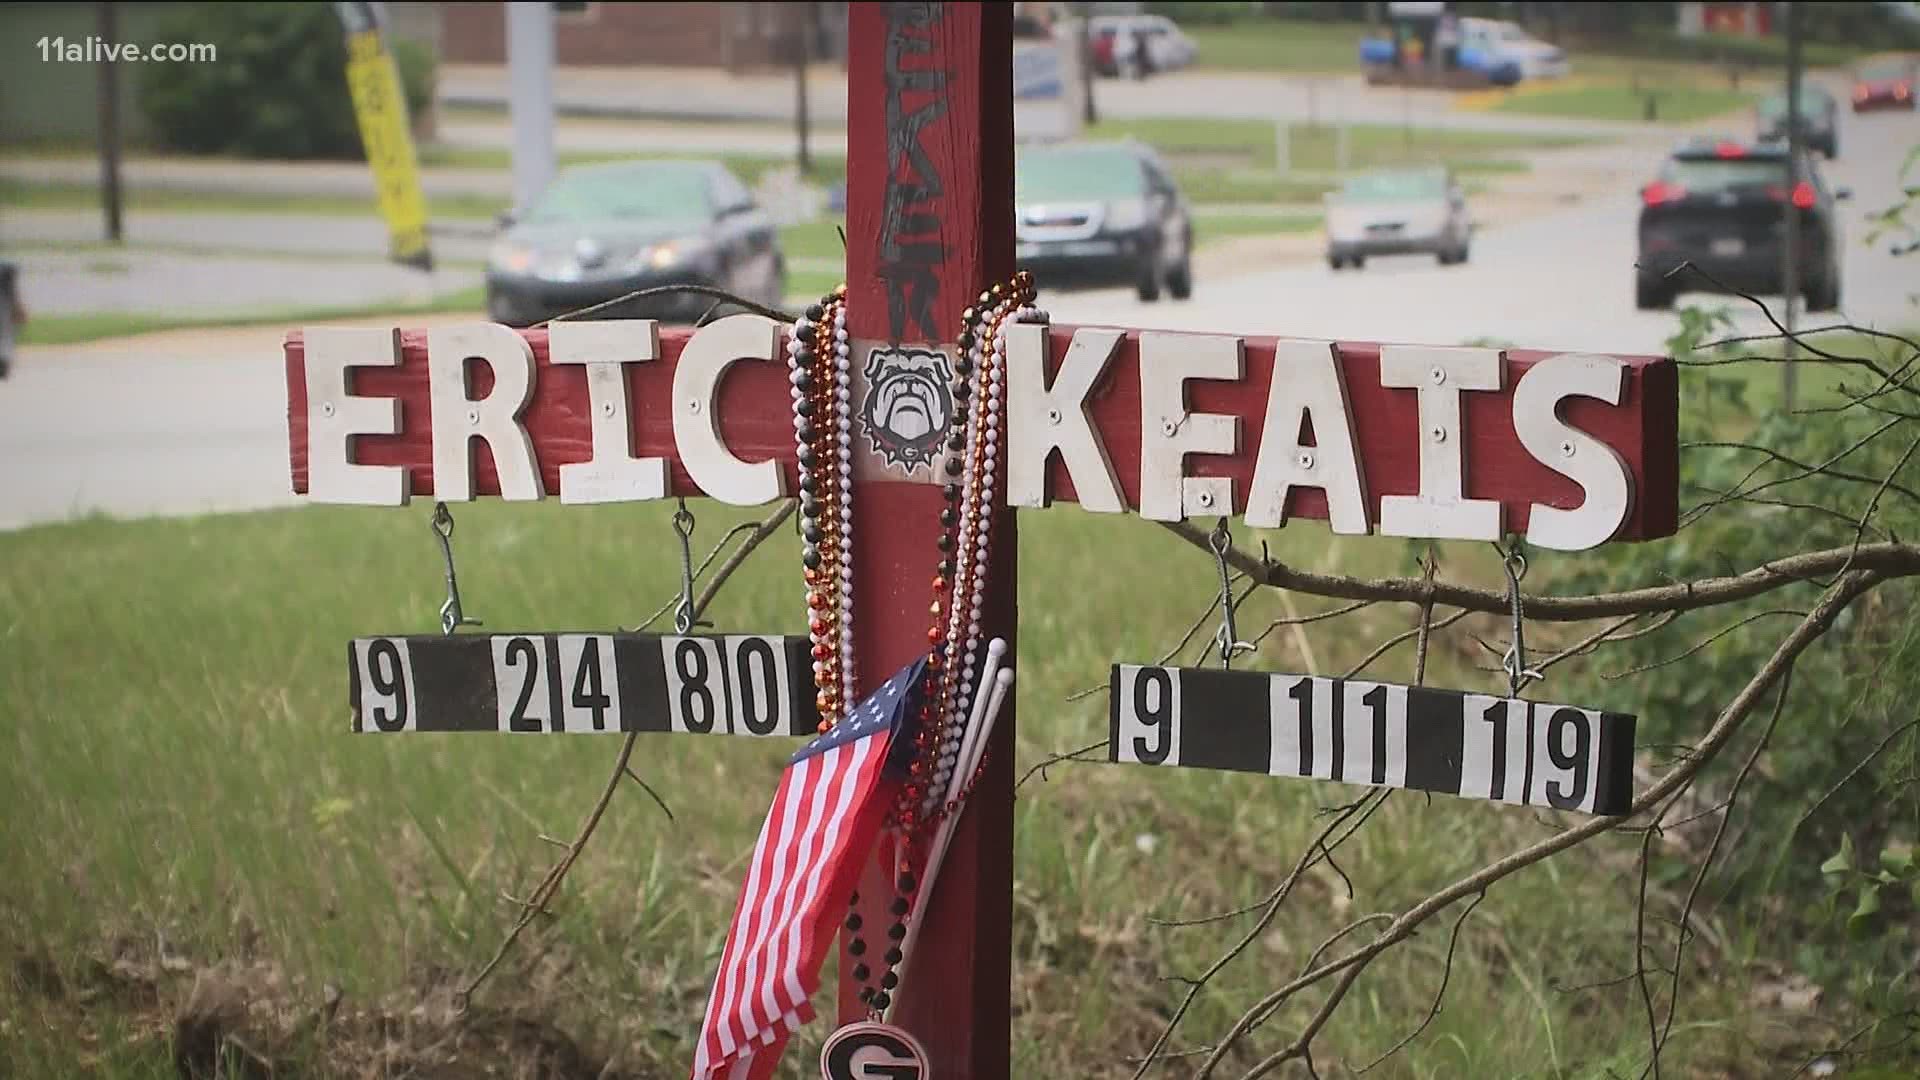 10 months after Eric Keais was left dying on the side of the road, his family is still waiting for justice.